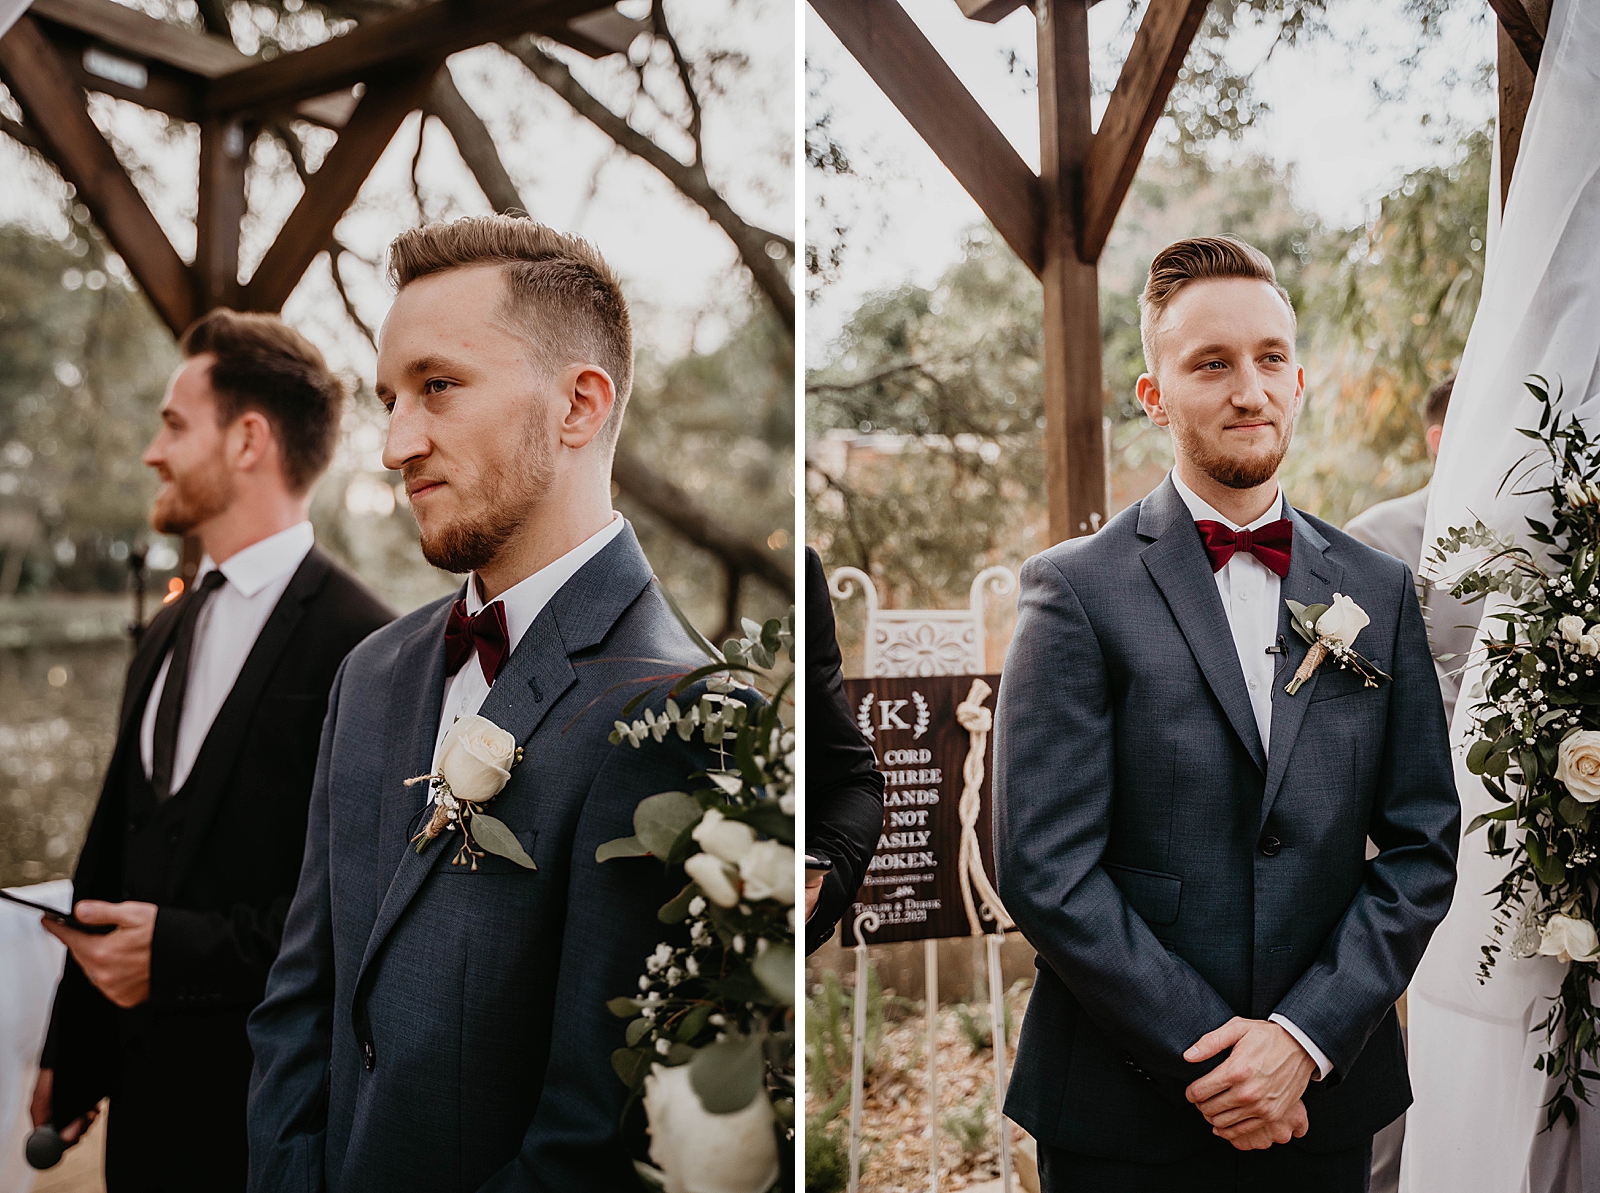 Groom awaiting Bride at the alter waiting for Bride with white boutonniere Living Sculptures Sanctuary Wedding Photography captured by South Florida Wedding Photographer Krystal Capone Photography  